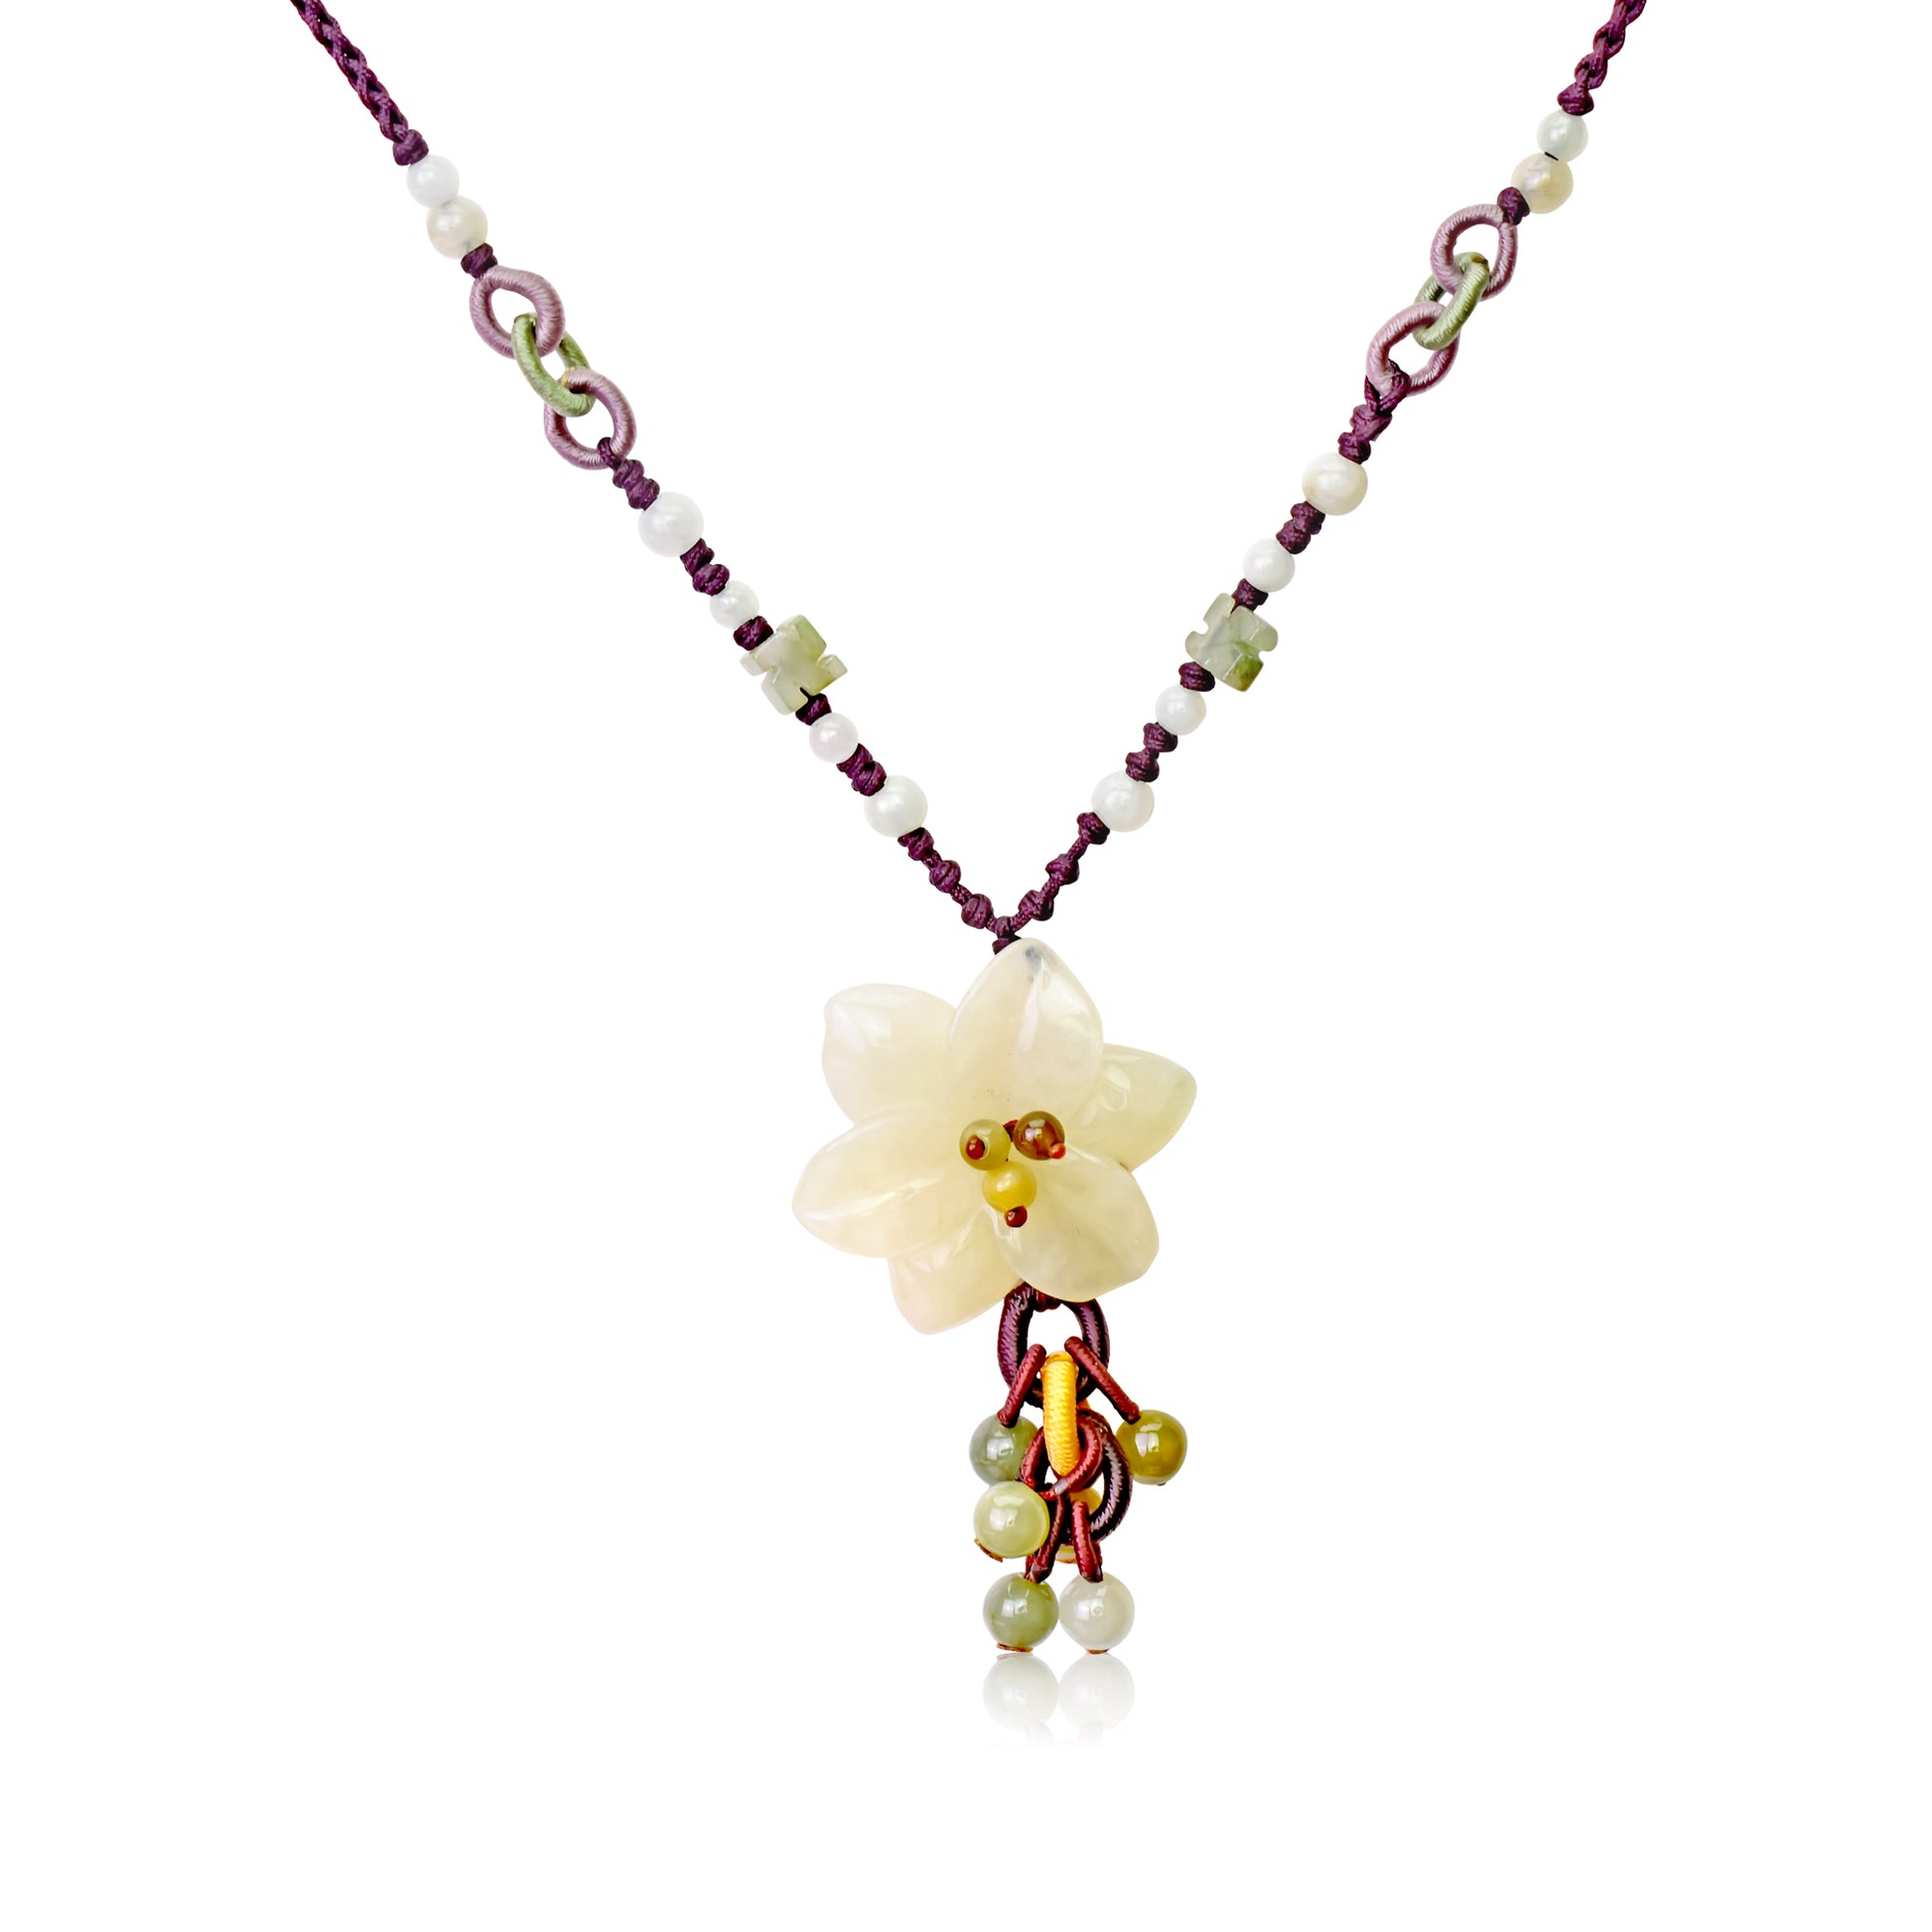 Experience Gracefulness with Pear Blossom Flower Honey Jade Necklace made with Brown Cord